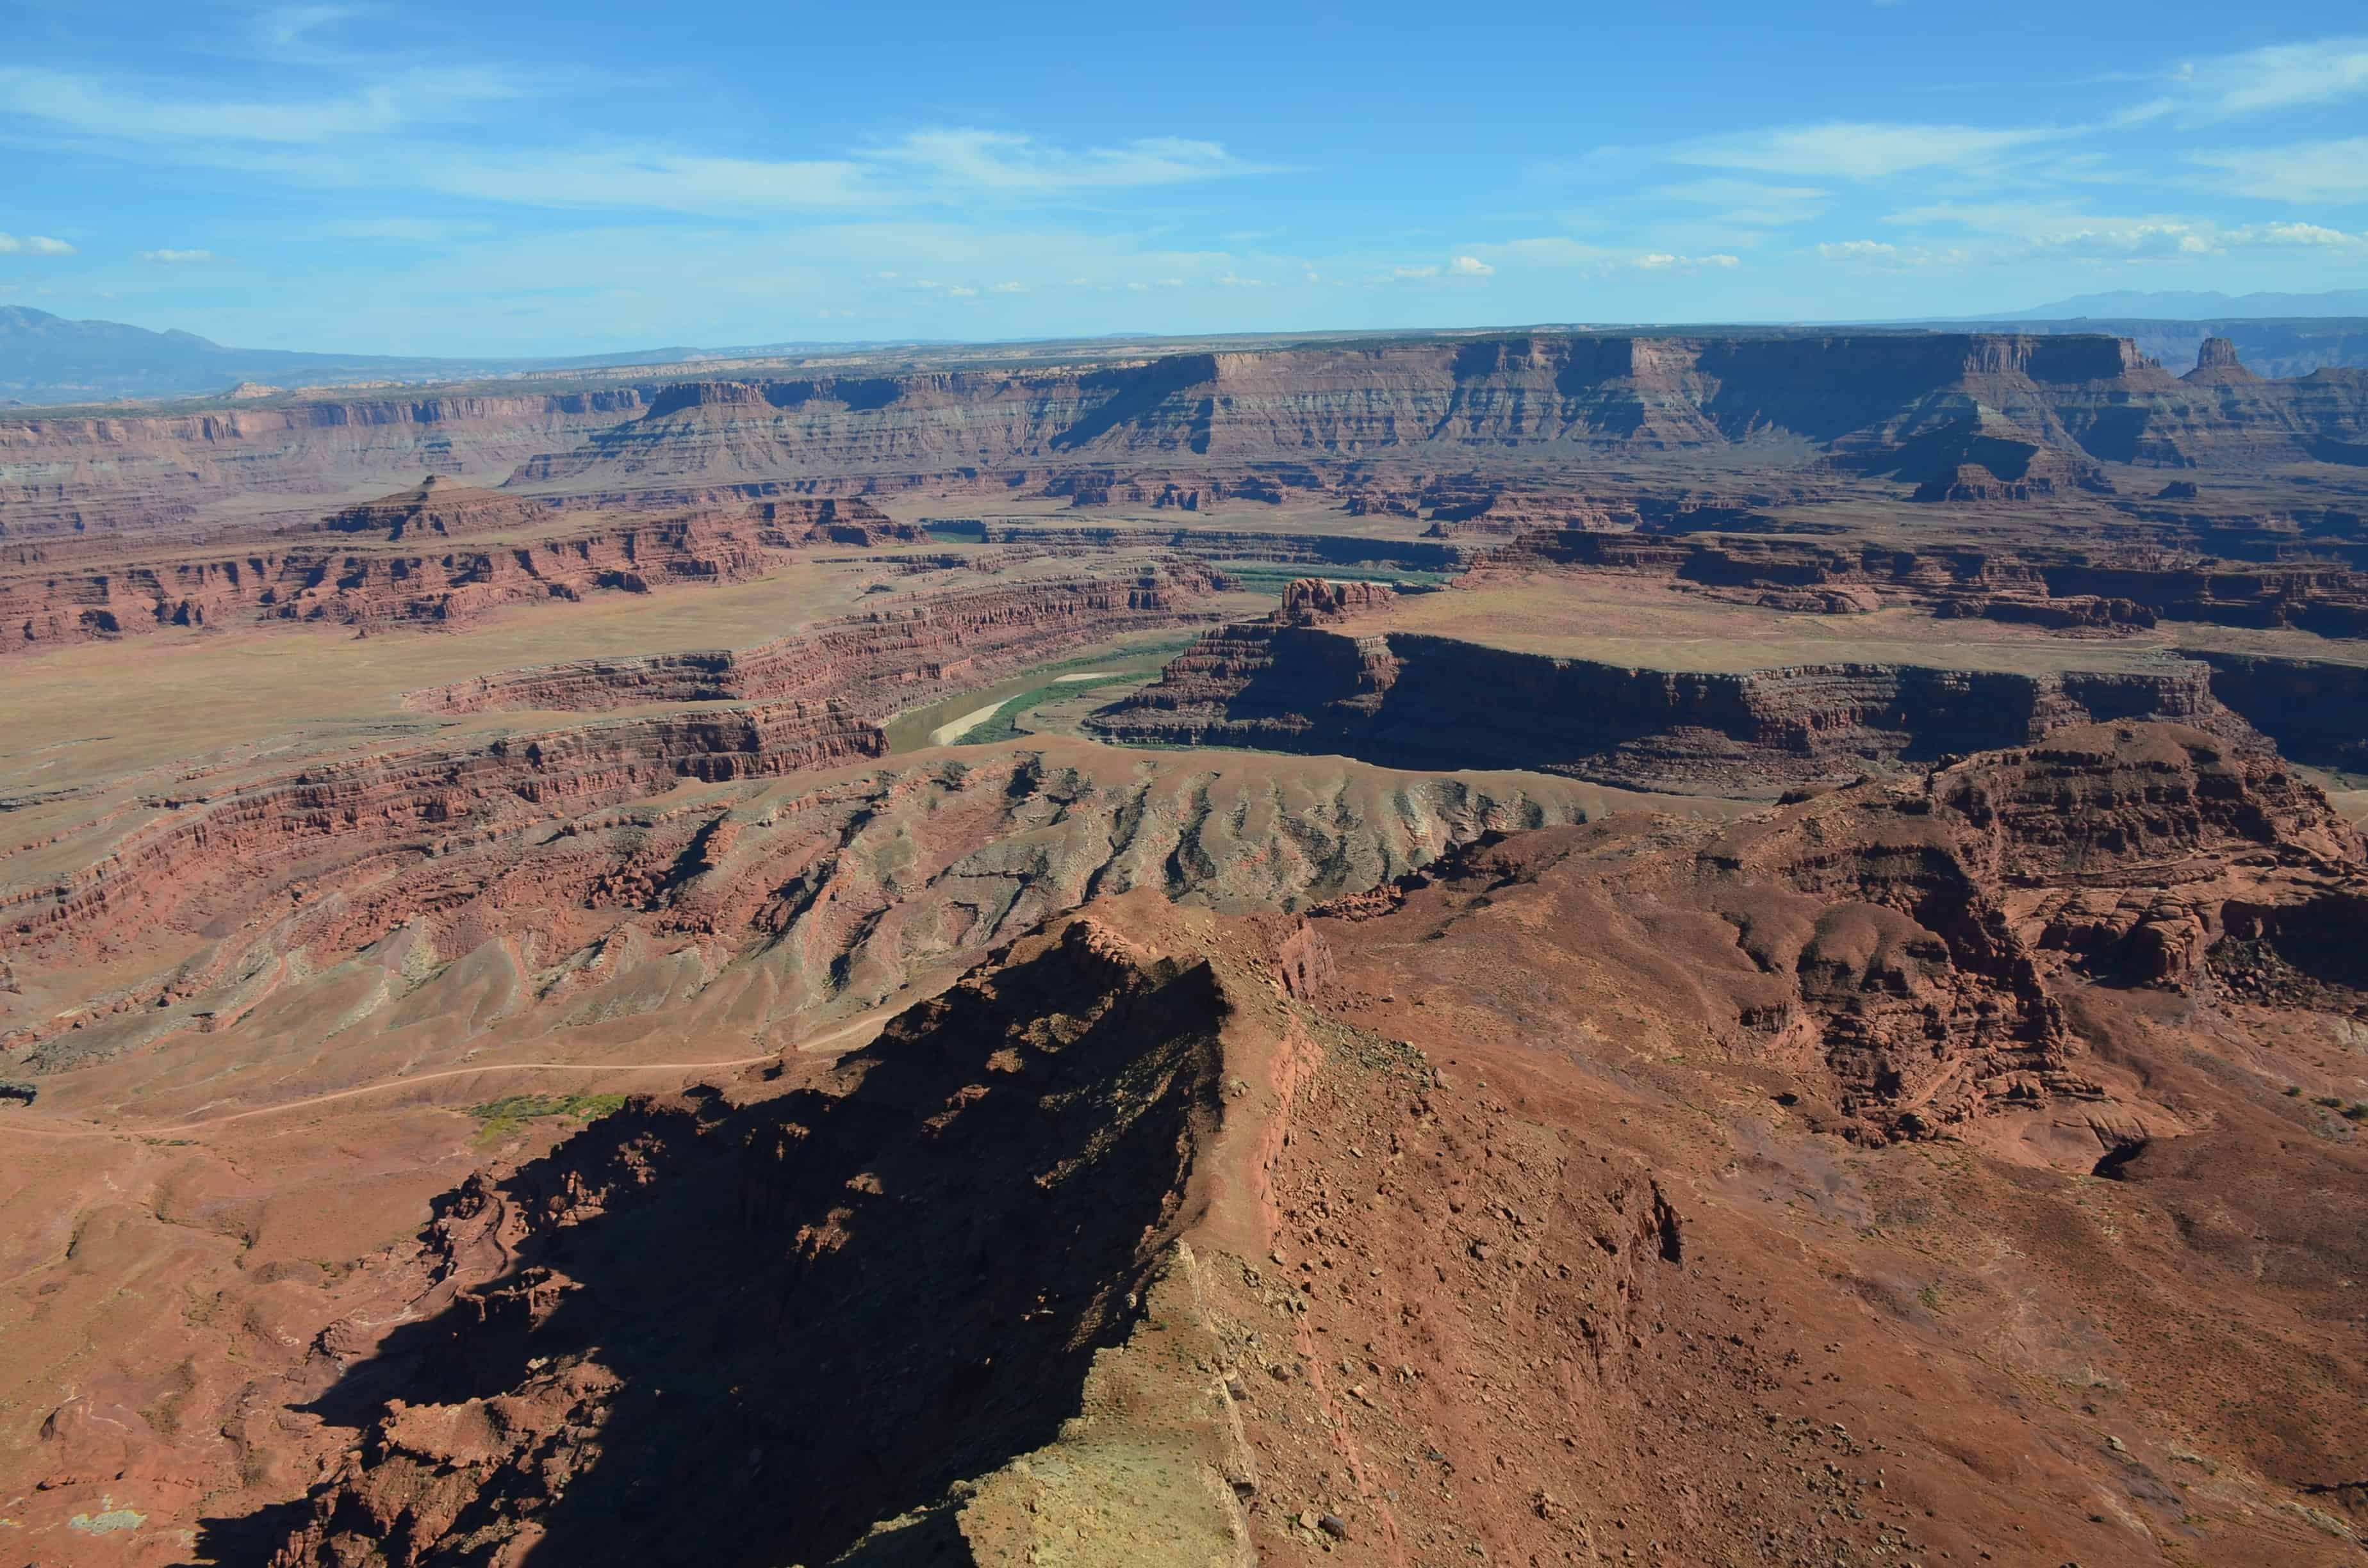 Looking southeast at Dead Horse Point at Dead Horse Point State Park in Utah